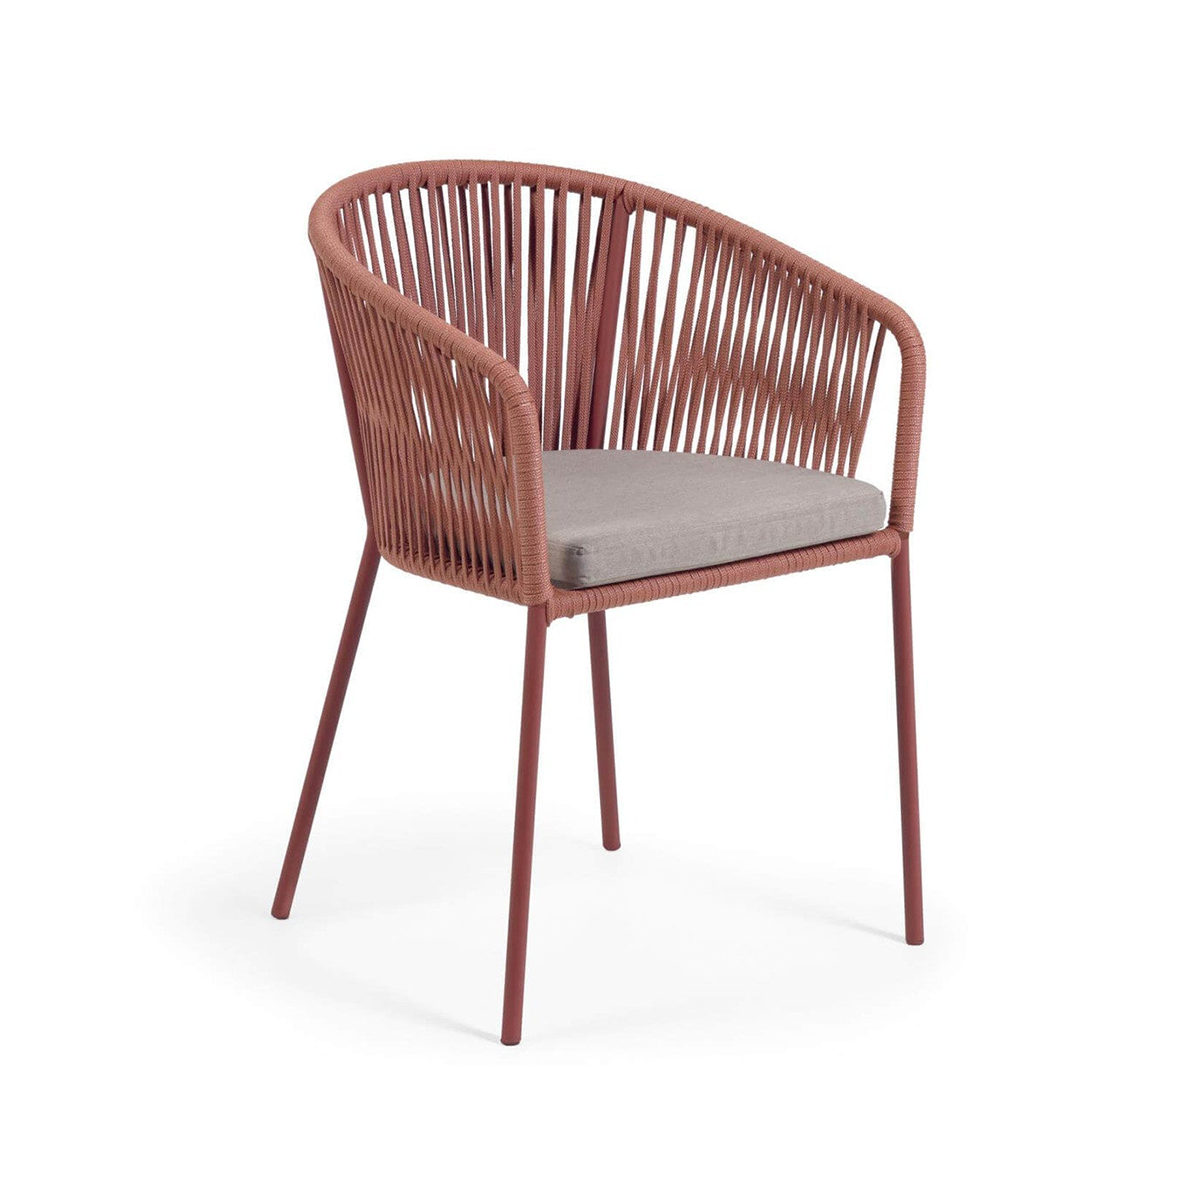 FondHouse Herrin Rope Dining Chair in Terracotta